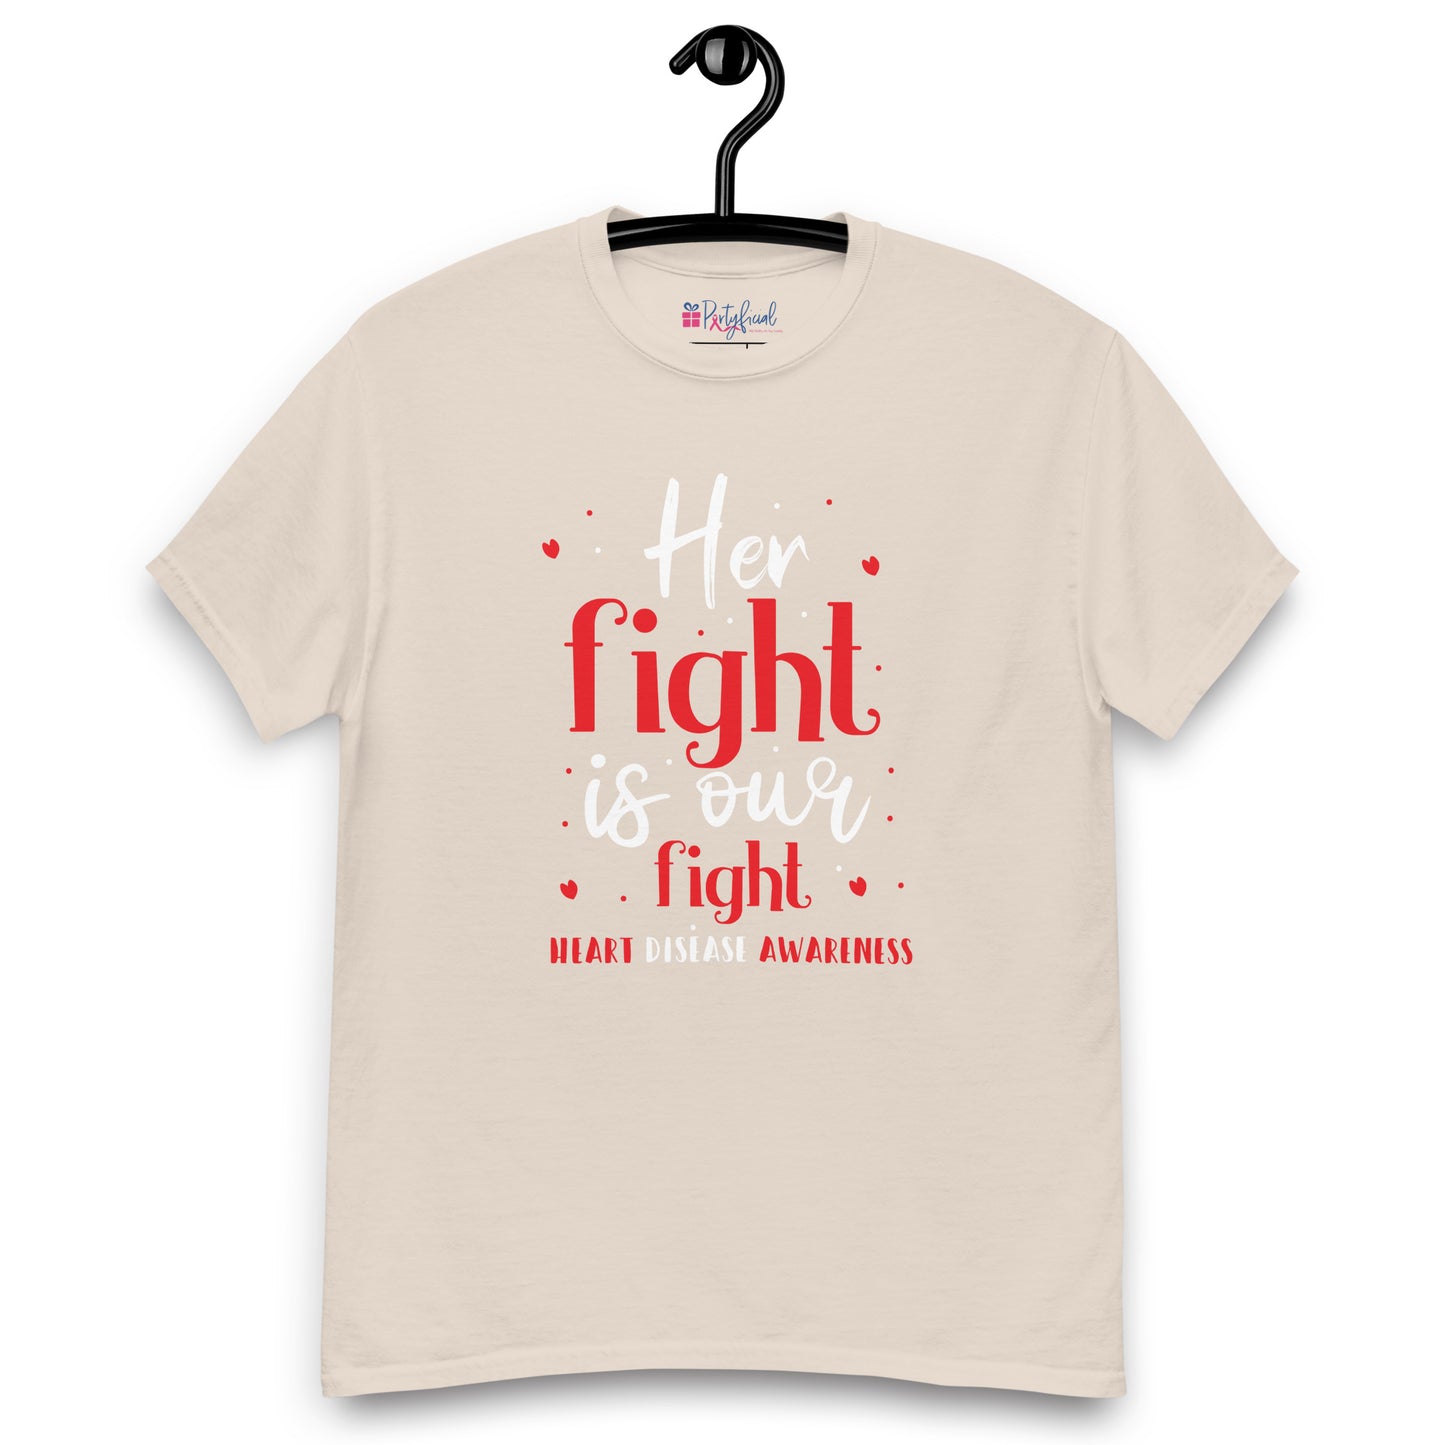 Her Fight is our Fight tee